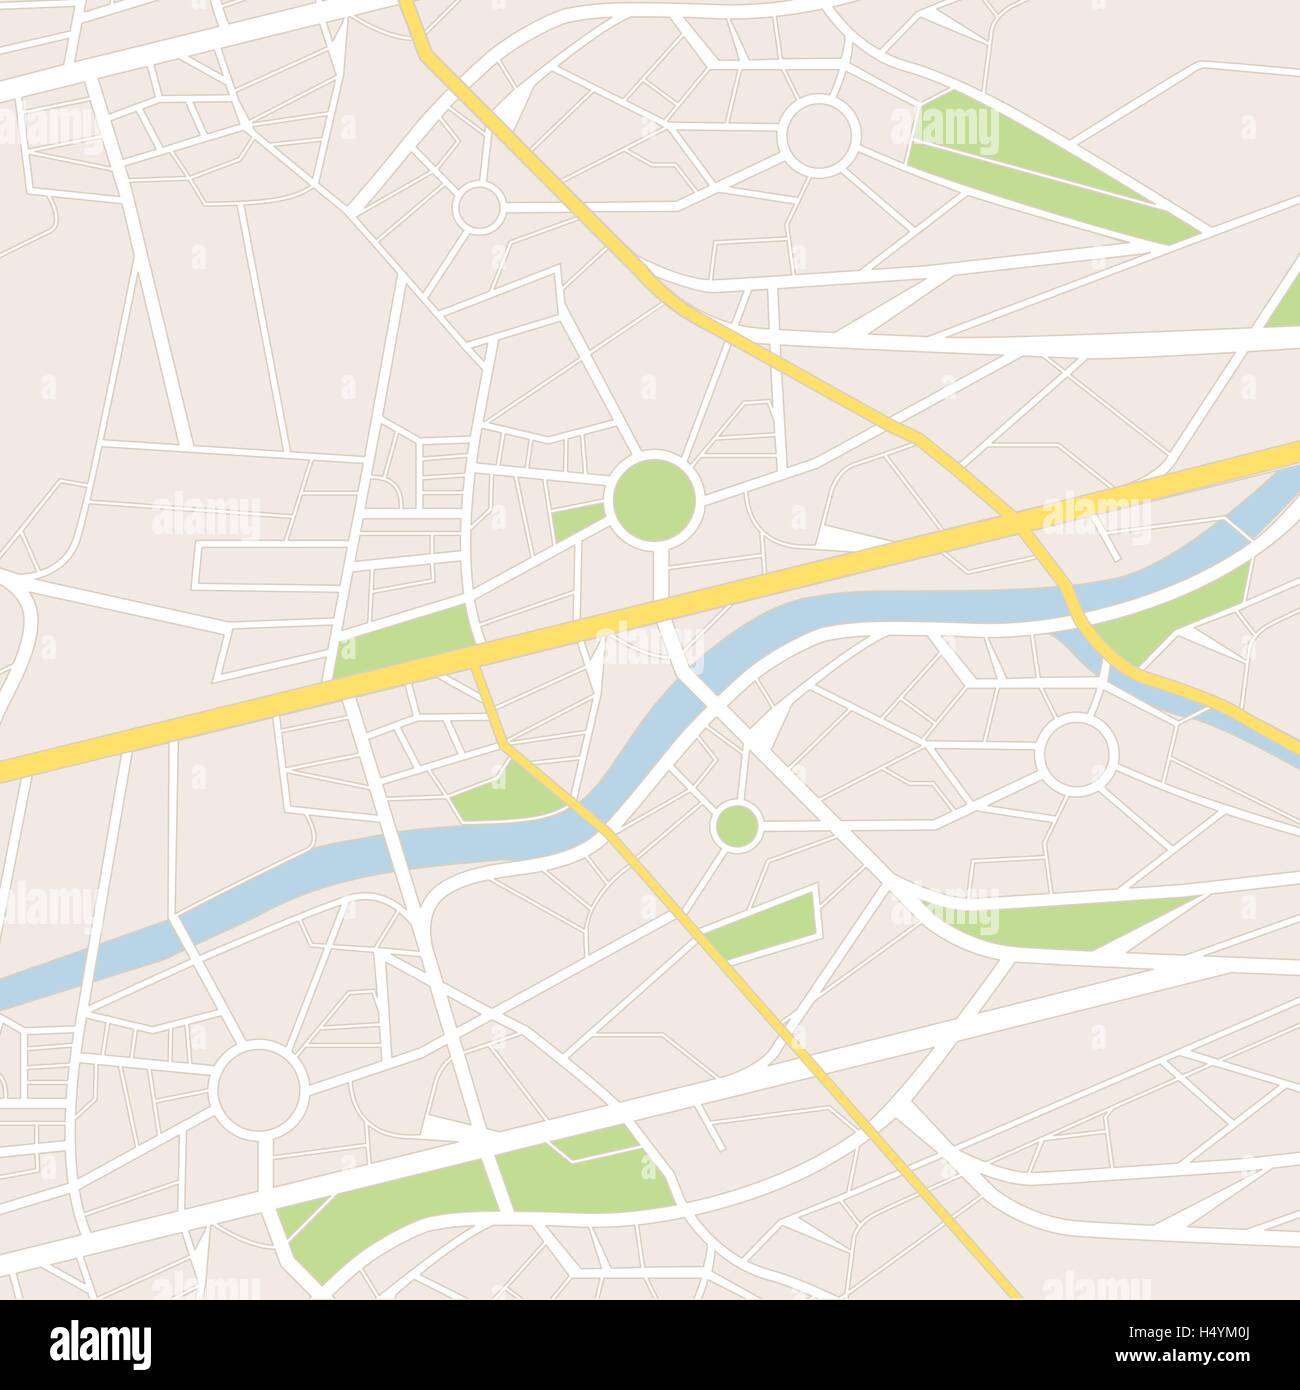 City map with streets, highways and green areas, gps navigation concept Stock Vector